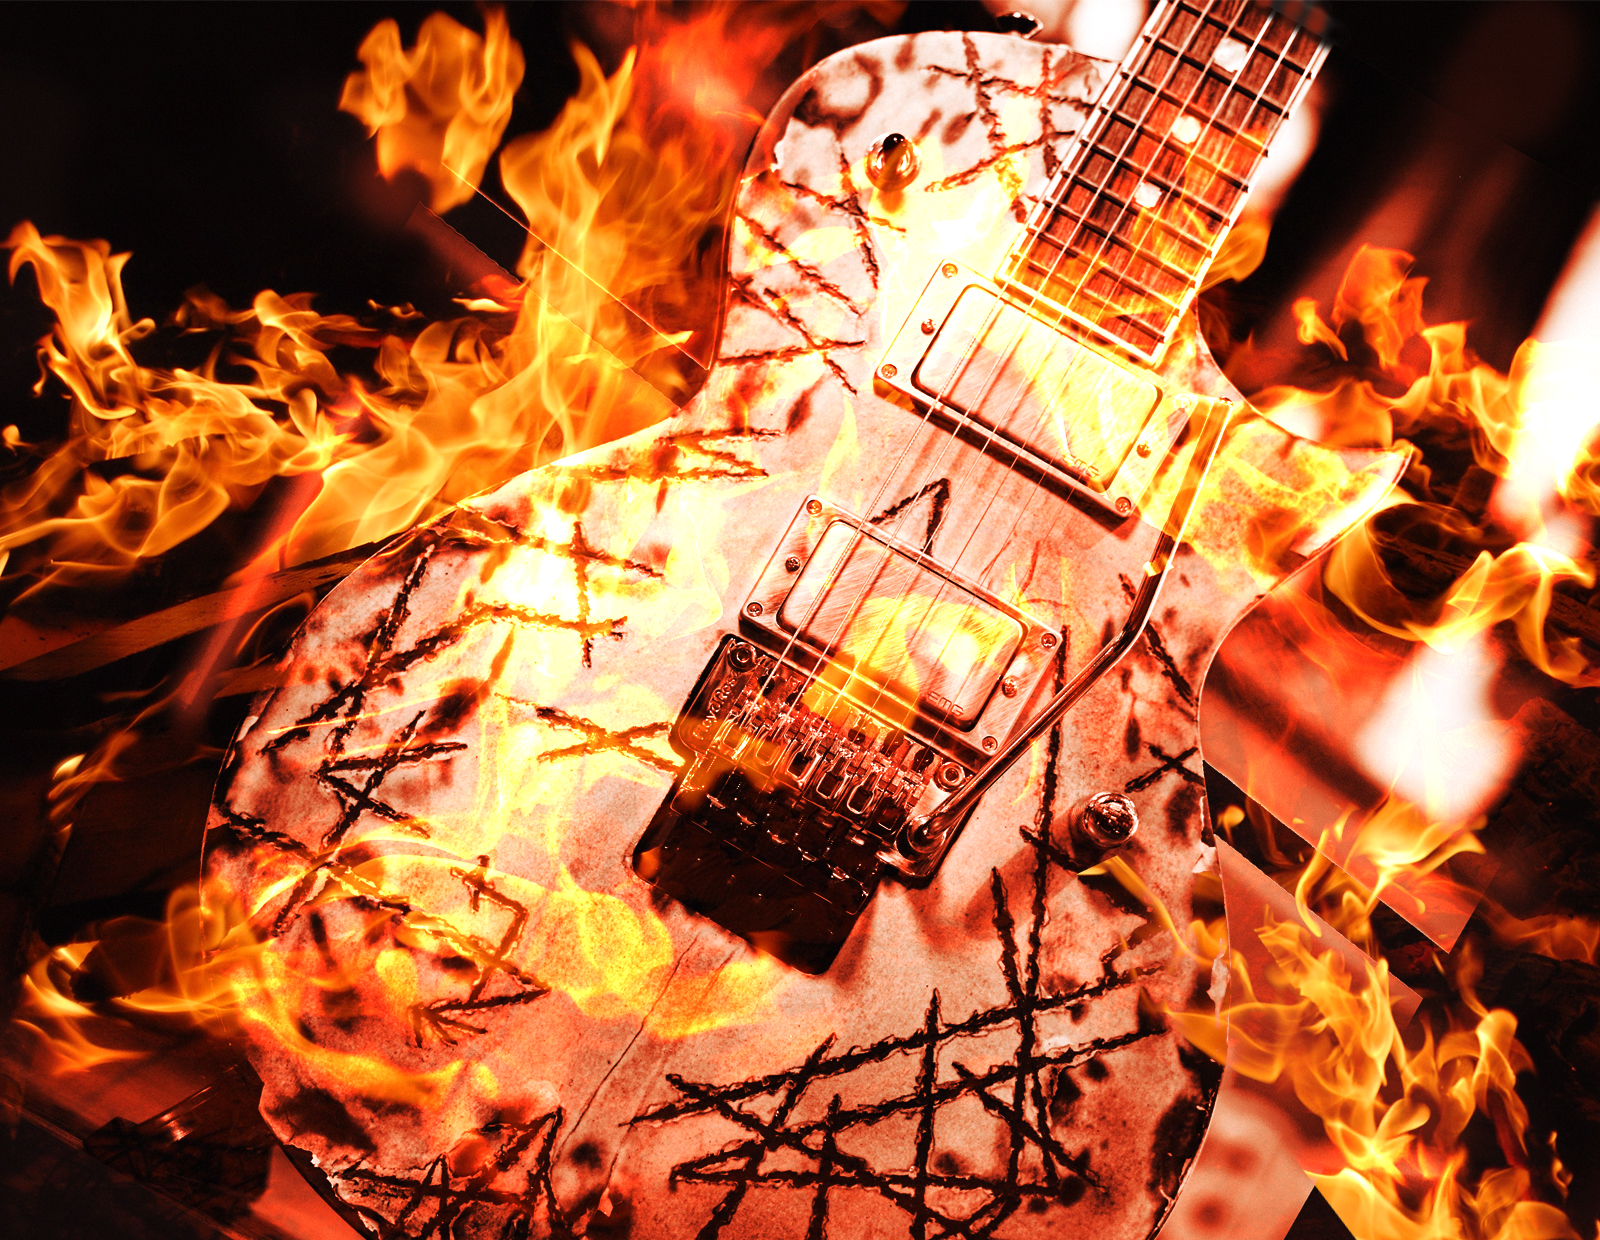 The 50 greatest moments in electric guitar history – only in the